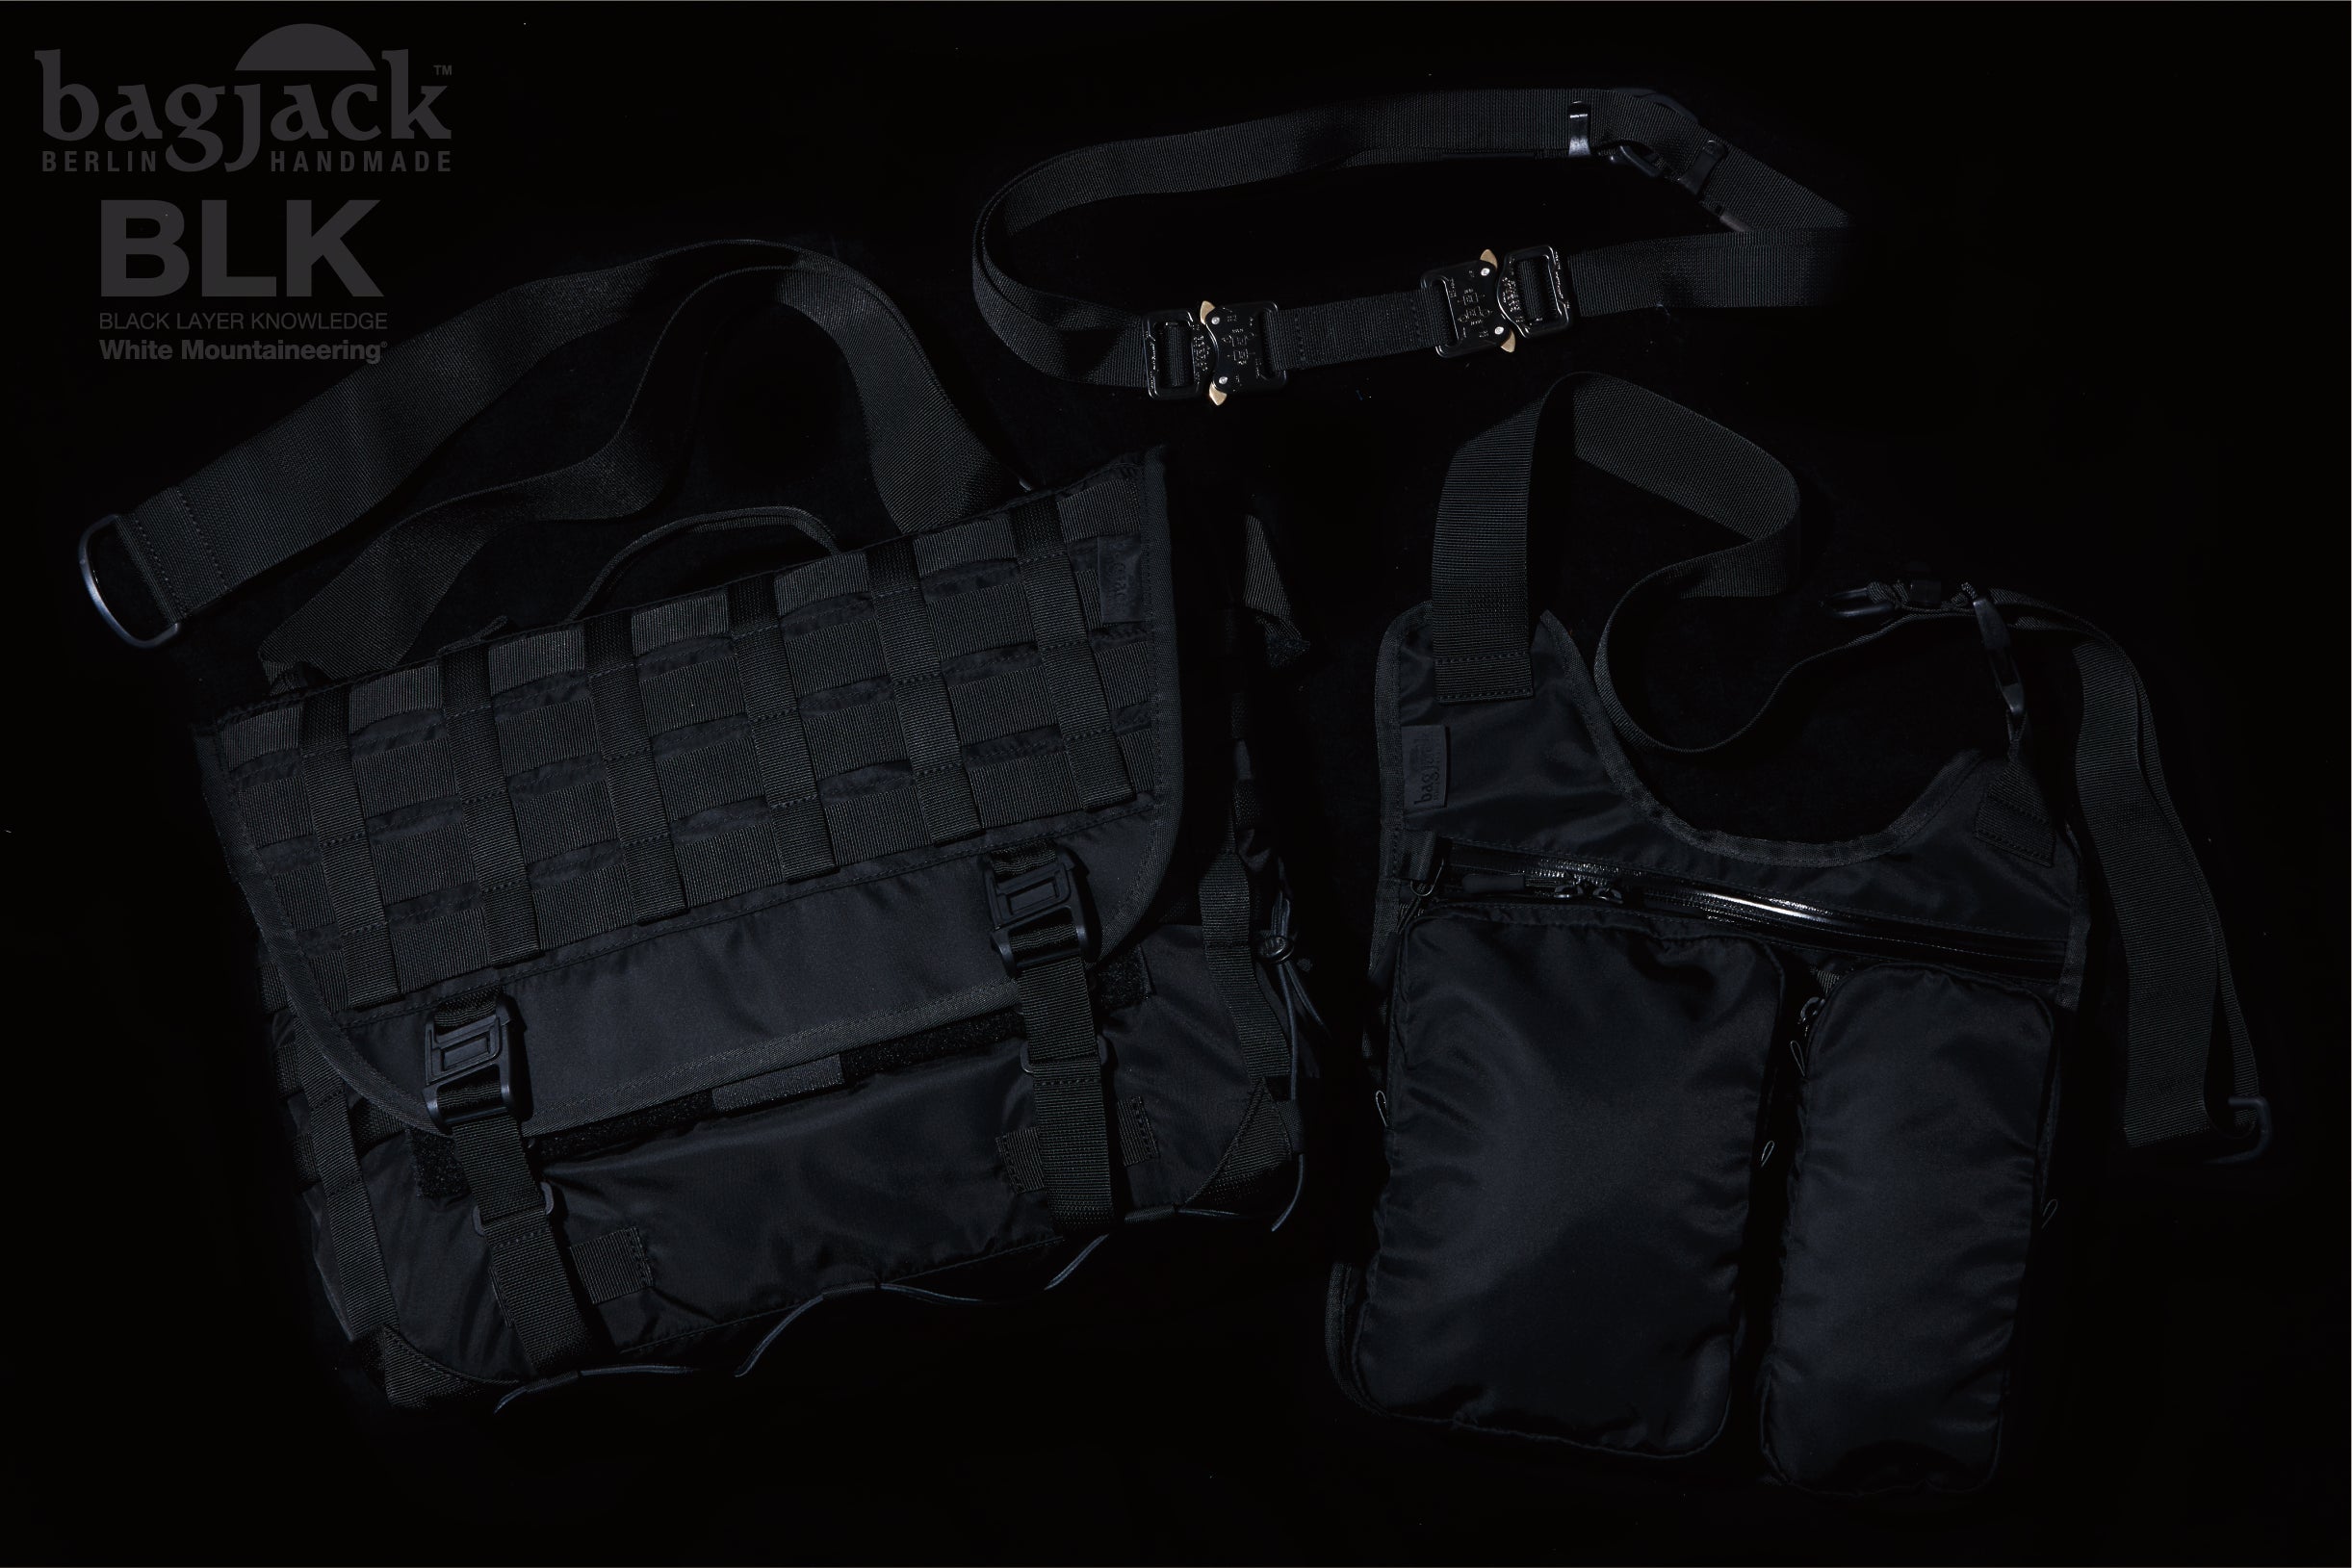 BLK × bagjack – White Mountaineering OFFICIAL WEB SITE.